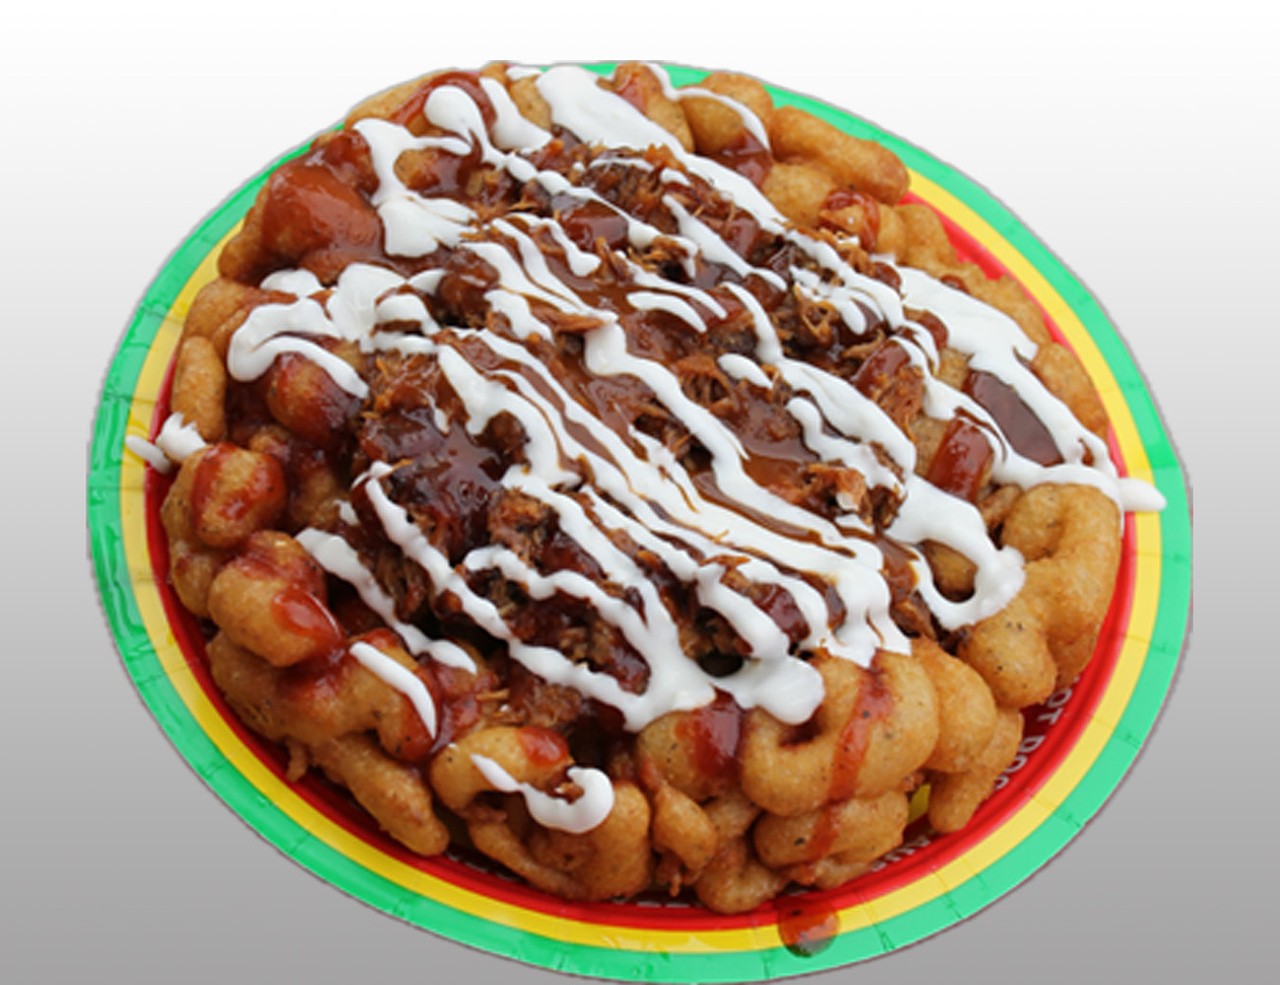 TEMPERAMENTAL HOG FUNNEL CAKE
Funnel cake mix combined with cornmeal and BBQ seasoning rub to create a crunchy delicious funnel cake that is topped with pulled pork. YOU pick which temperament you want on your cake. Happy - sweet Angry - hot Furious - super hot Then we smooth it down with cream cheese.
Location: The Best Around 